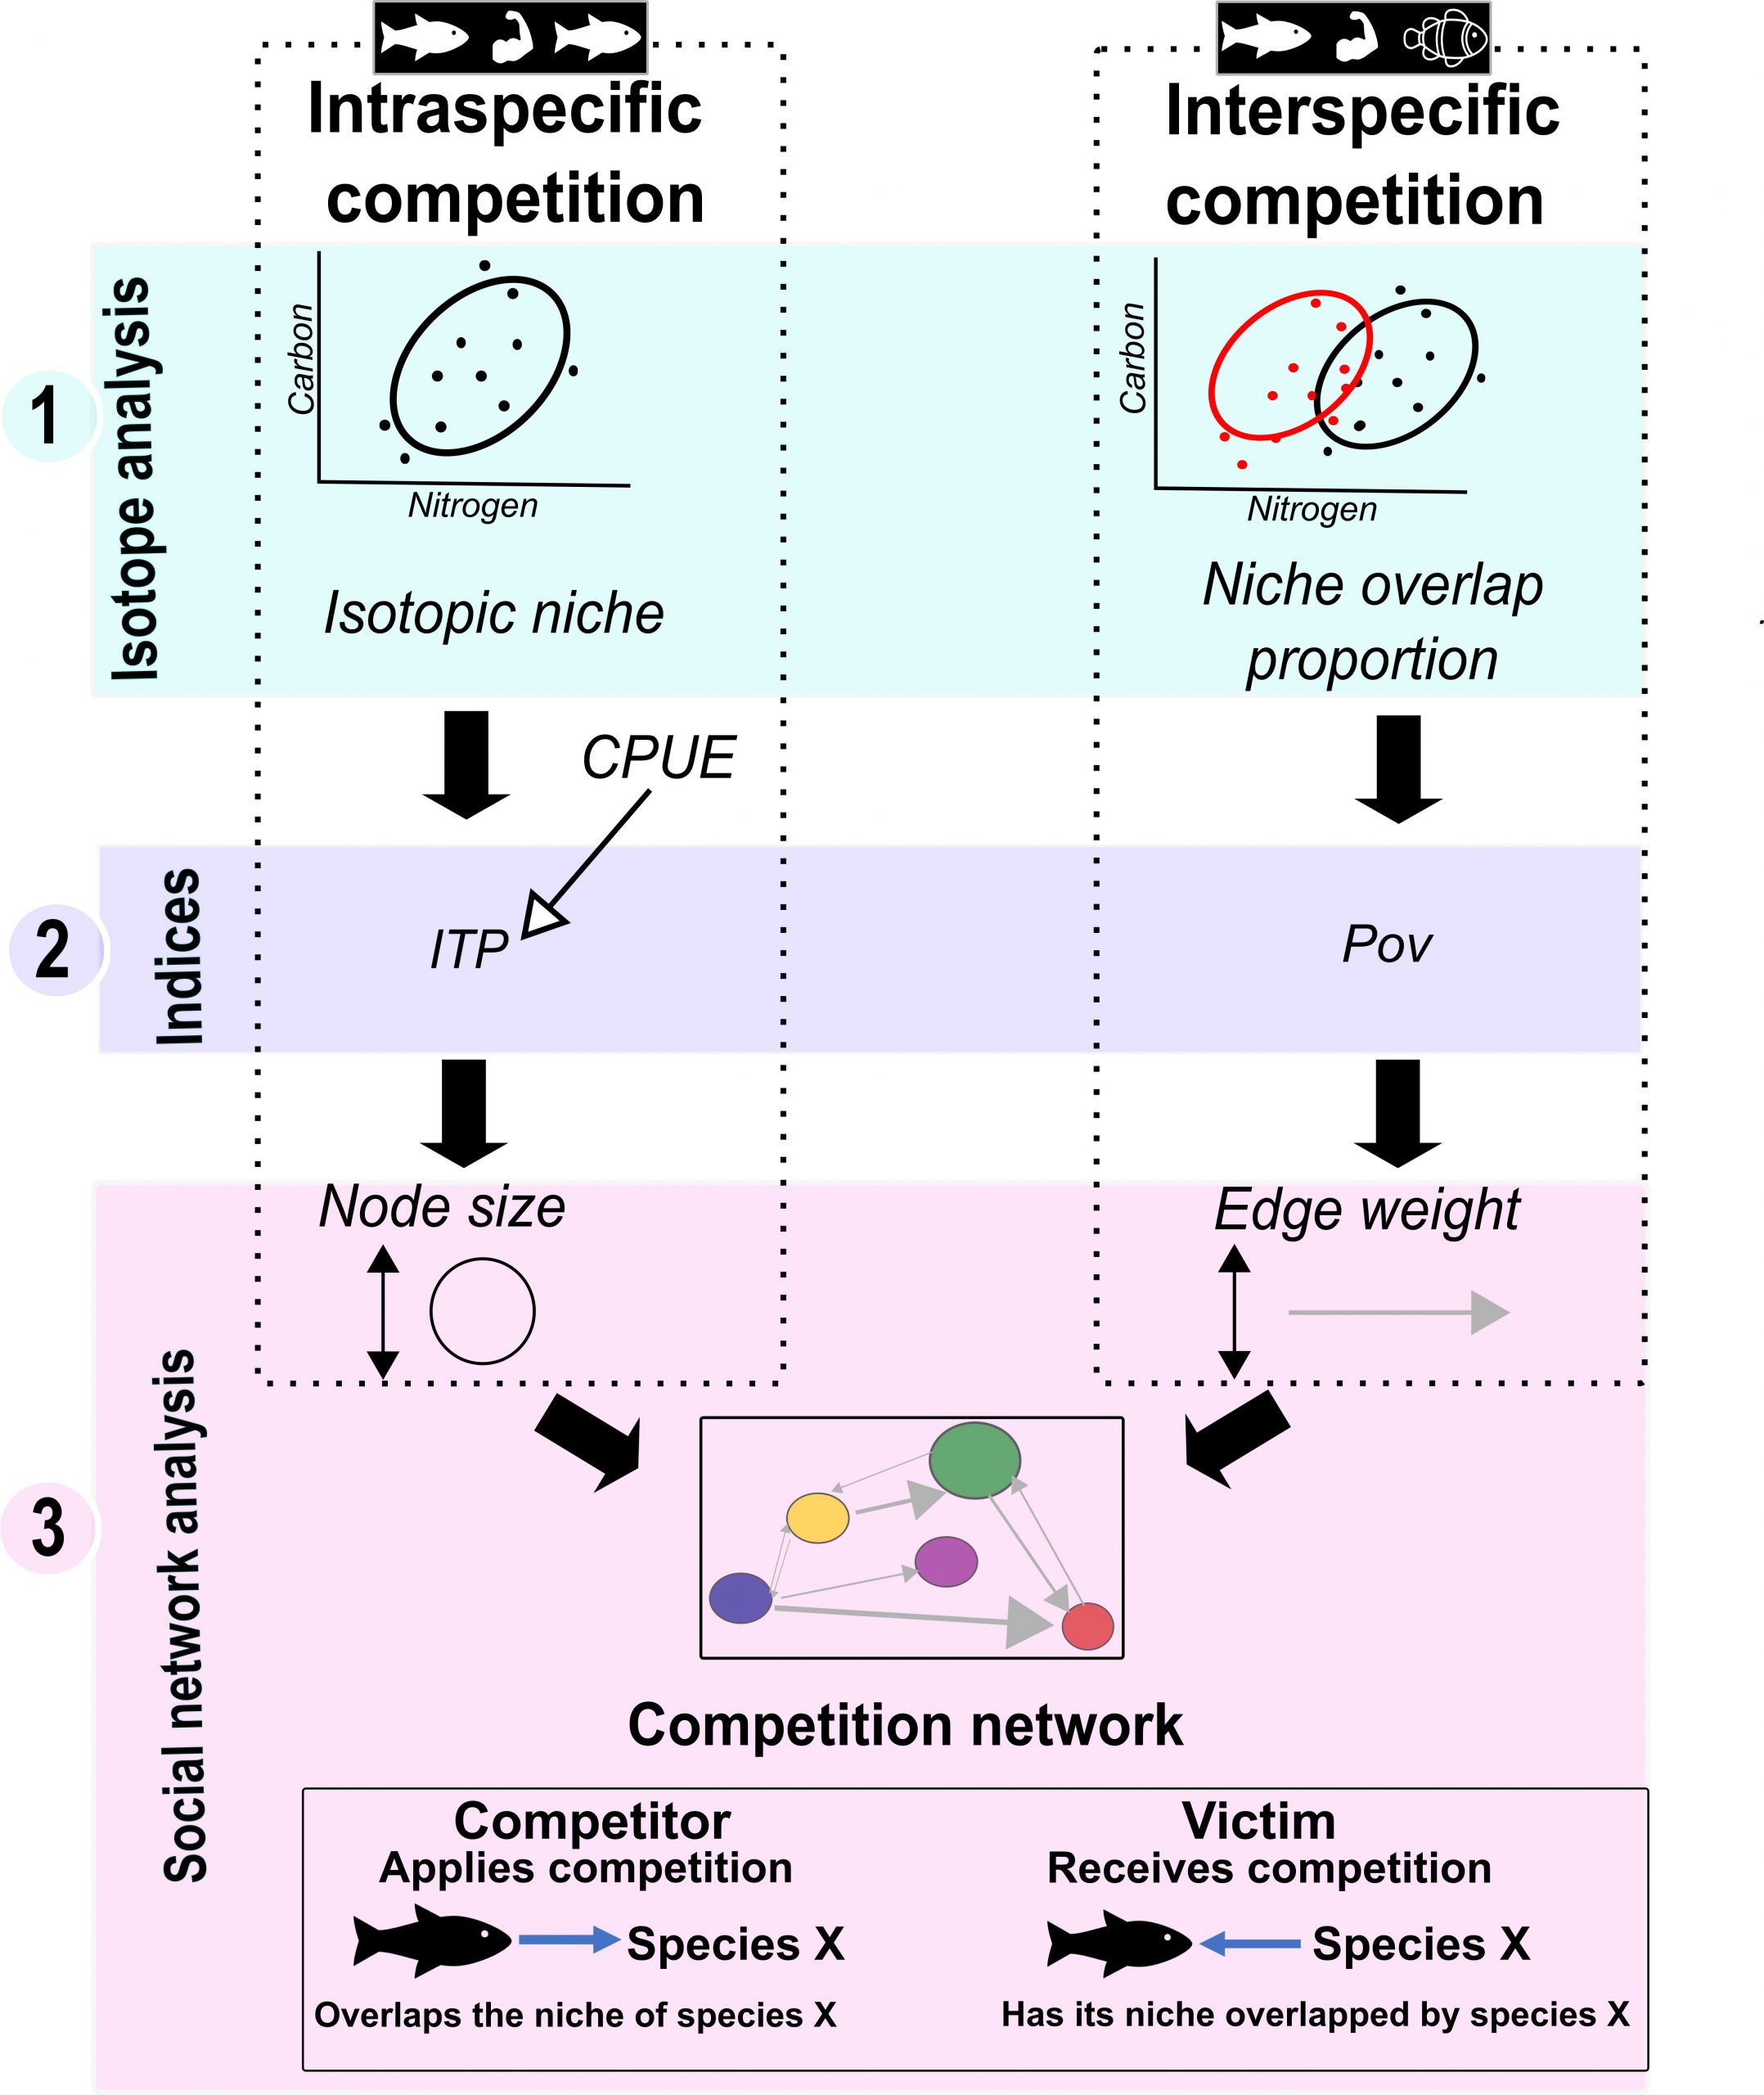 Competing with each other: fish isotopic niche in two resource availability contexts